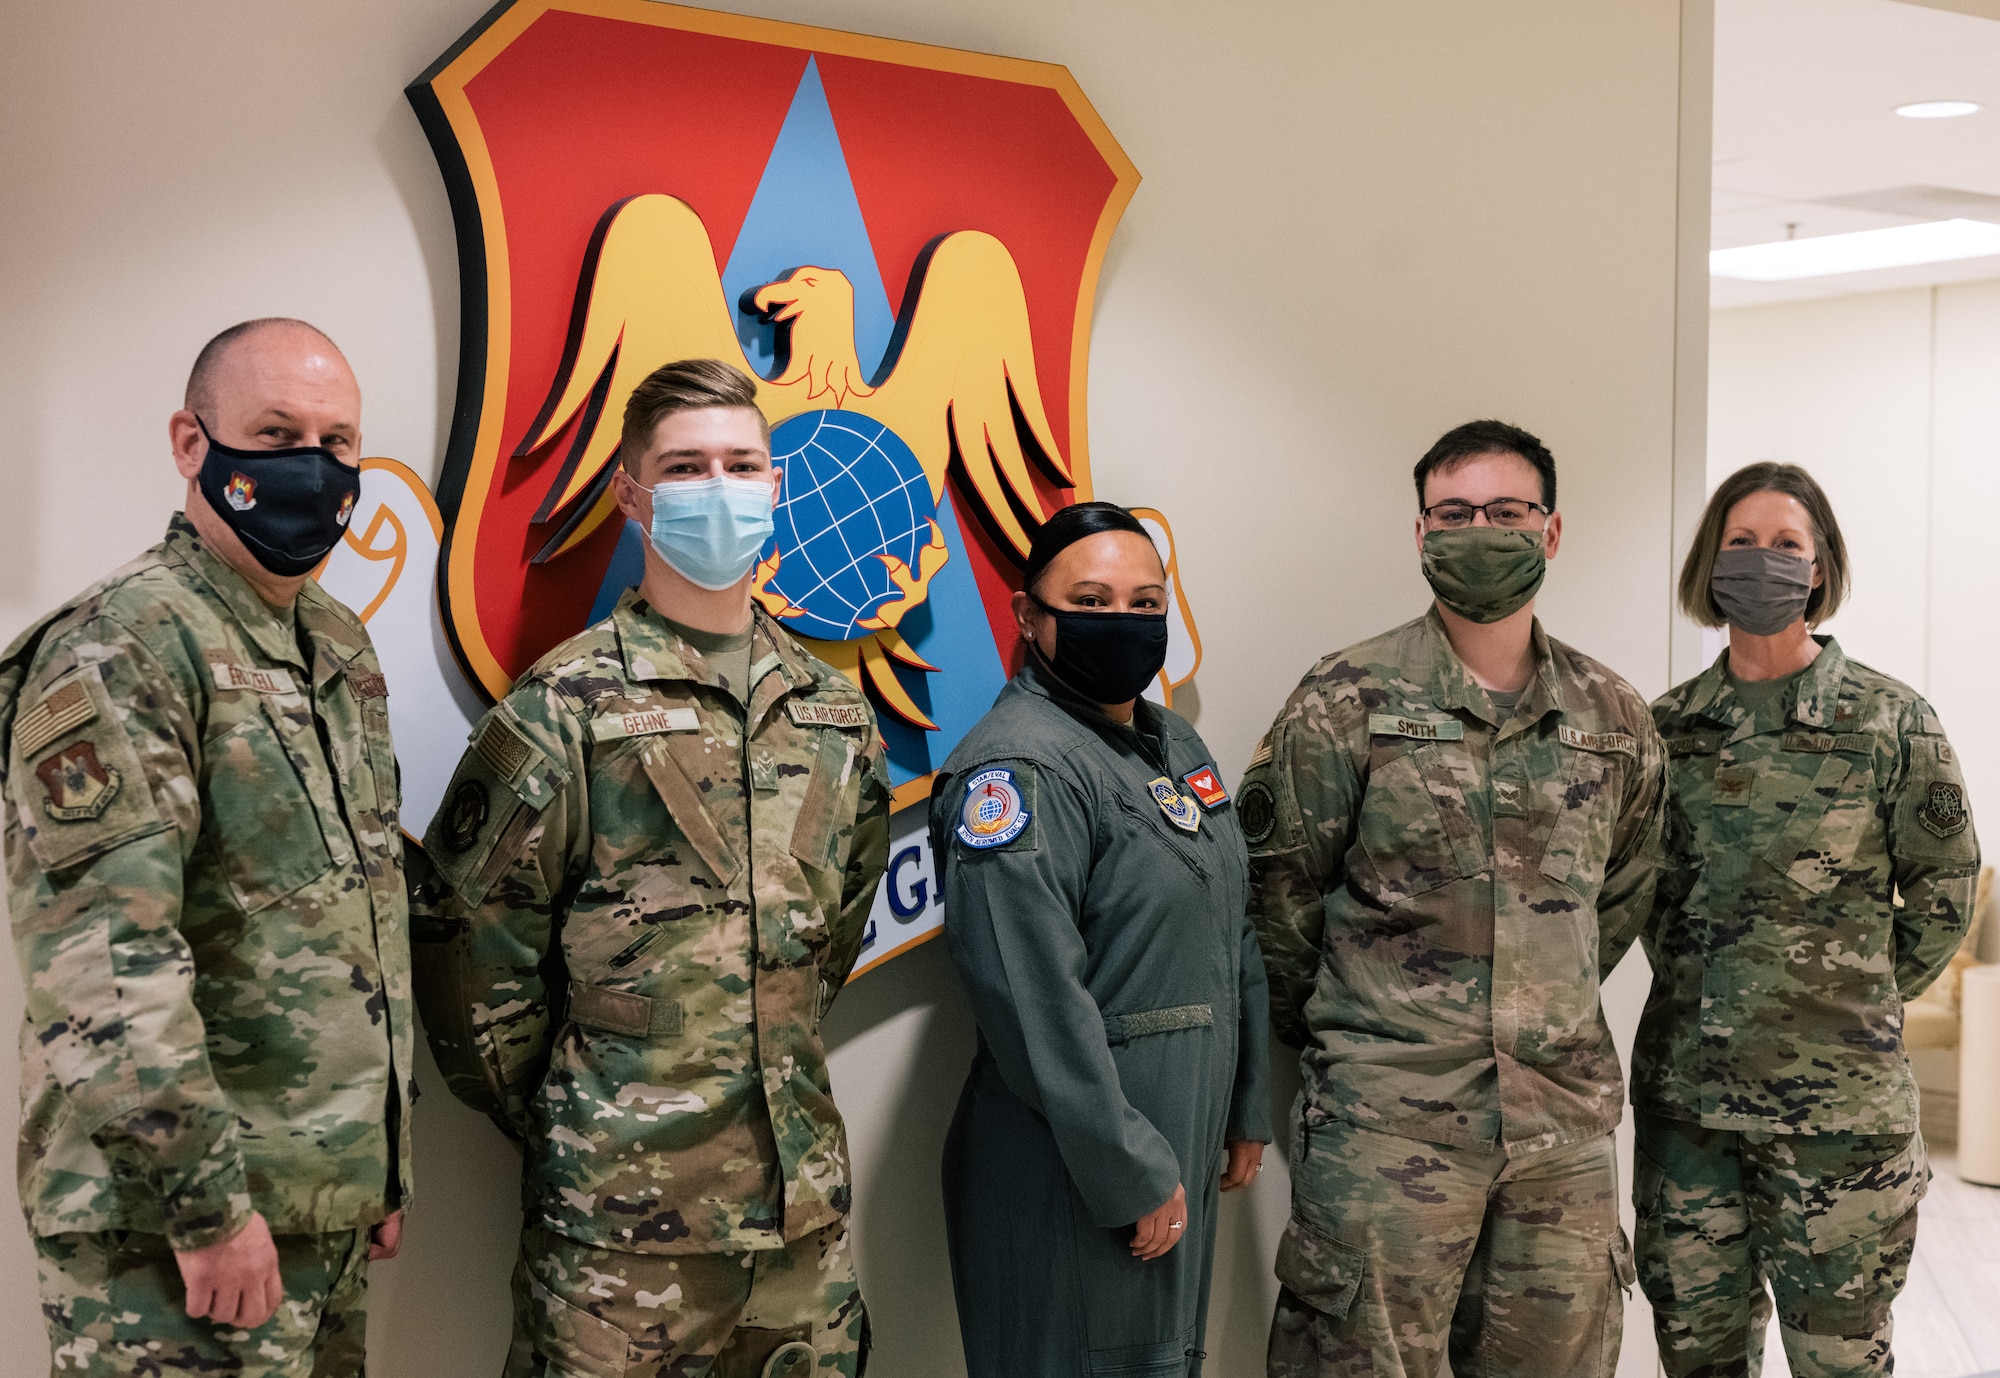 Airman 1st Class James Gehne, 375th Civil Engineer Squadron firefighter, second from the left, Master Sgt. Renee Cheatham, 375th Aeromedical Evacuation Squadron aeromedical evacuation technician, middle, and Senior Airman Matthew Smith, 375th Security Forces patrolman, second from the right, are congratulated by Chief Master Sgt. Chuck Frizzell, 375th Air Mobility Wing command chief, left, and Col. Angela Ochoa, 375th AMW vice-commander, right, for being the first three members of Team Scott to receive a COVID-19 inoculation on Scott Air Force Base, Ill., Jan 6, 2021. The Department of Defense prioritizes personnel to receive the vaccines based on Center of Disease Control guidance and the DoD COVID Task Force’s assessment of unique DoD mission requirements. The DoD Prioritization Schema prioritizes those providing direct medical care, maintaining essential national security and installation functions, deploying forces and beneficiaries at the highest risk for developing serious illness before other members of the DoD population. (U.S. Air Force photo by Tech. Sgt. Jordan Castelan)